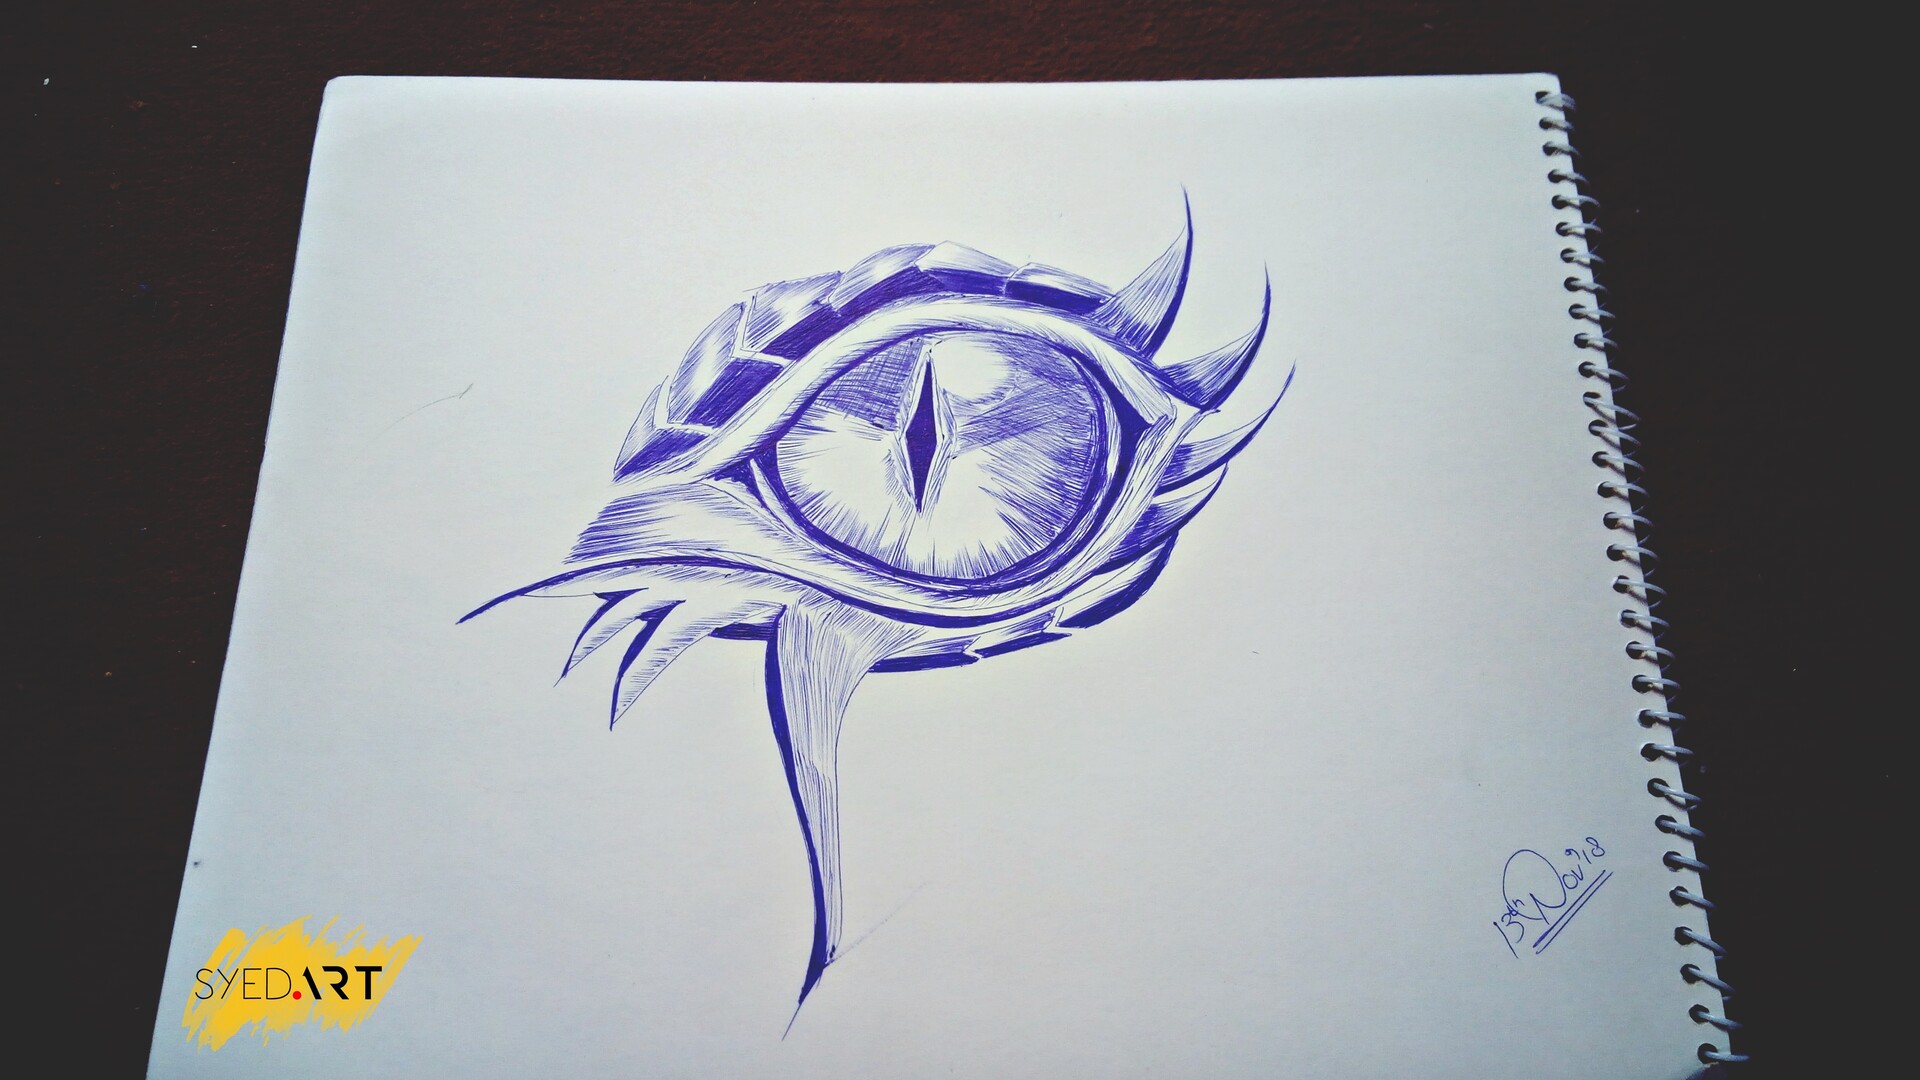 Do More With Less: First attempt at a ballpoint pen eye drawing using  Staedtler ballpoint pens